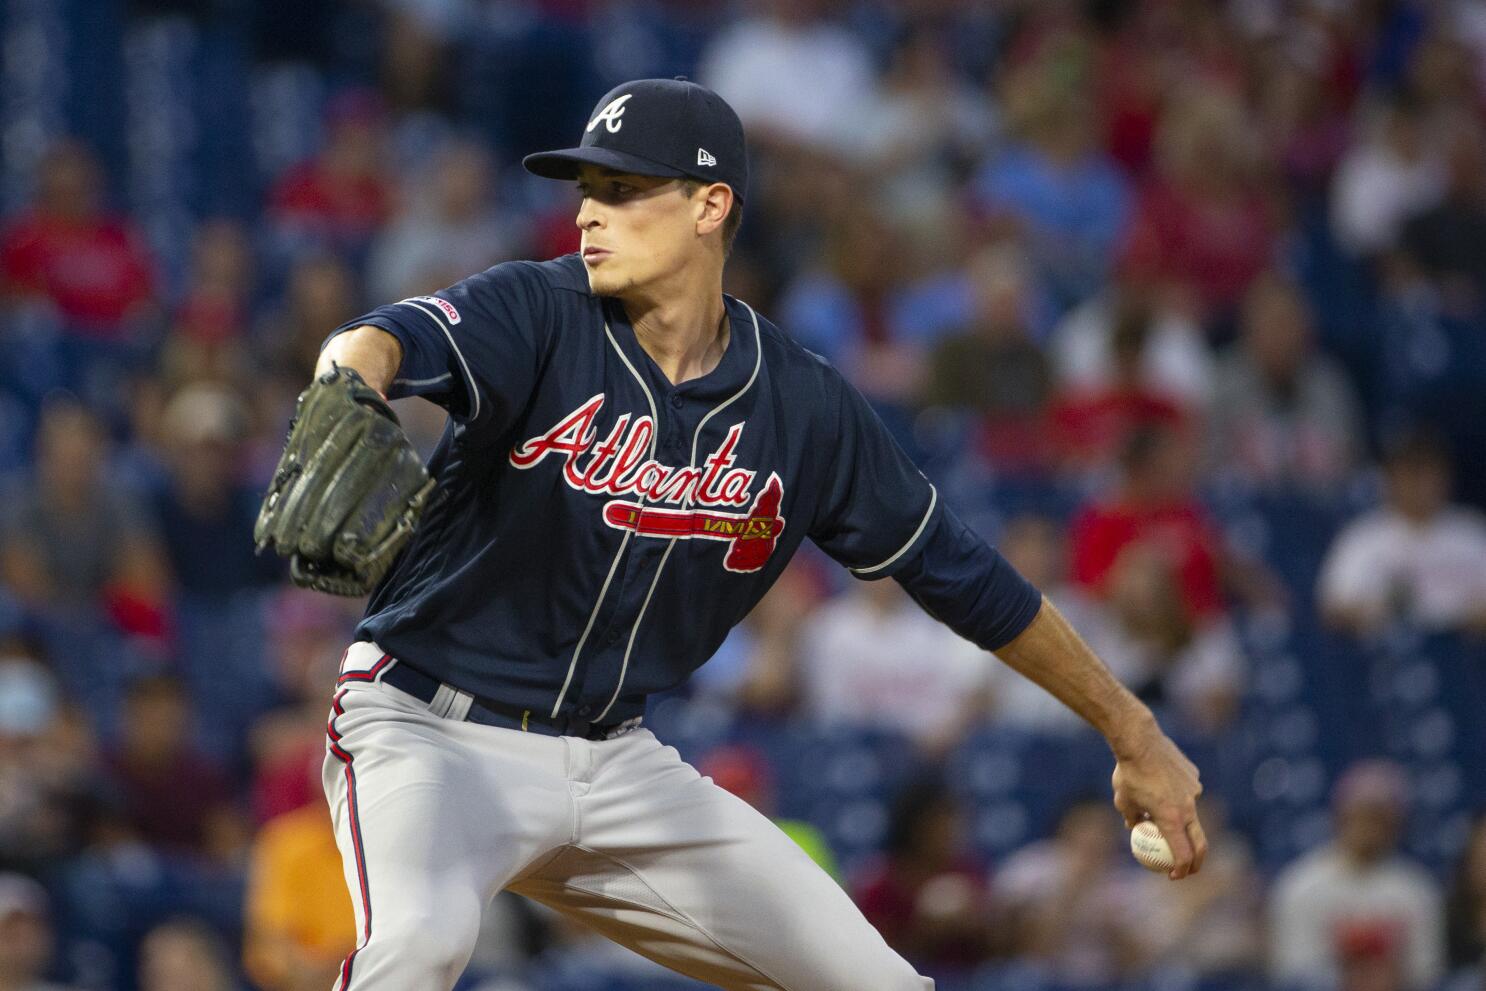 With pitchers fried, Braves' Max Fried tries to win World Series